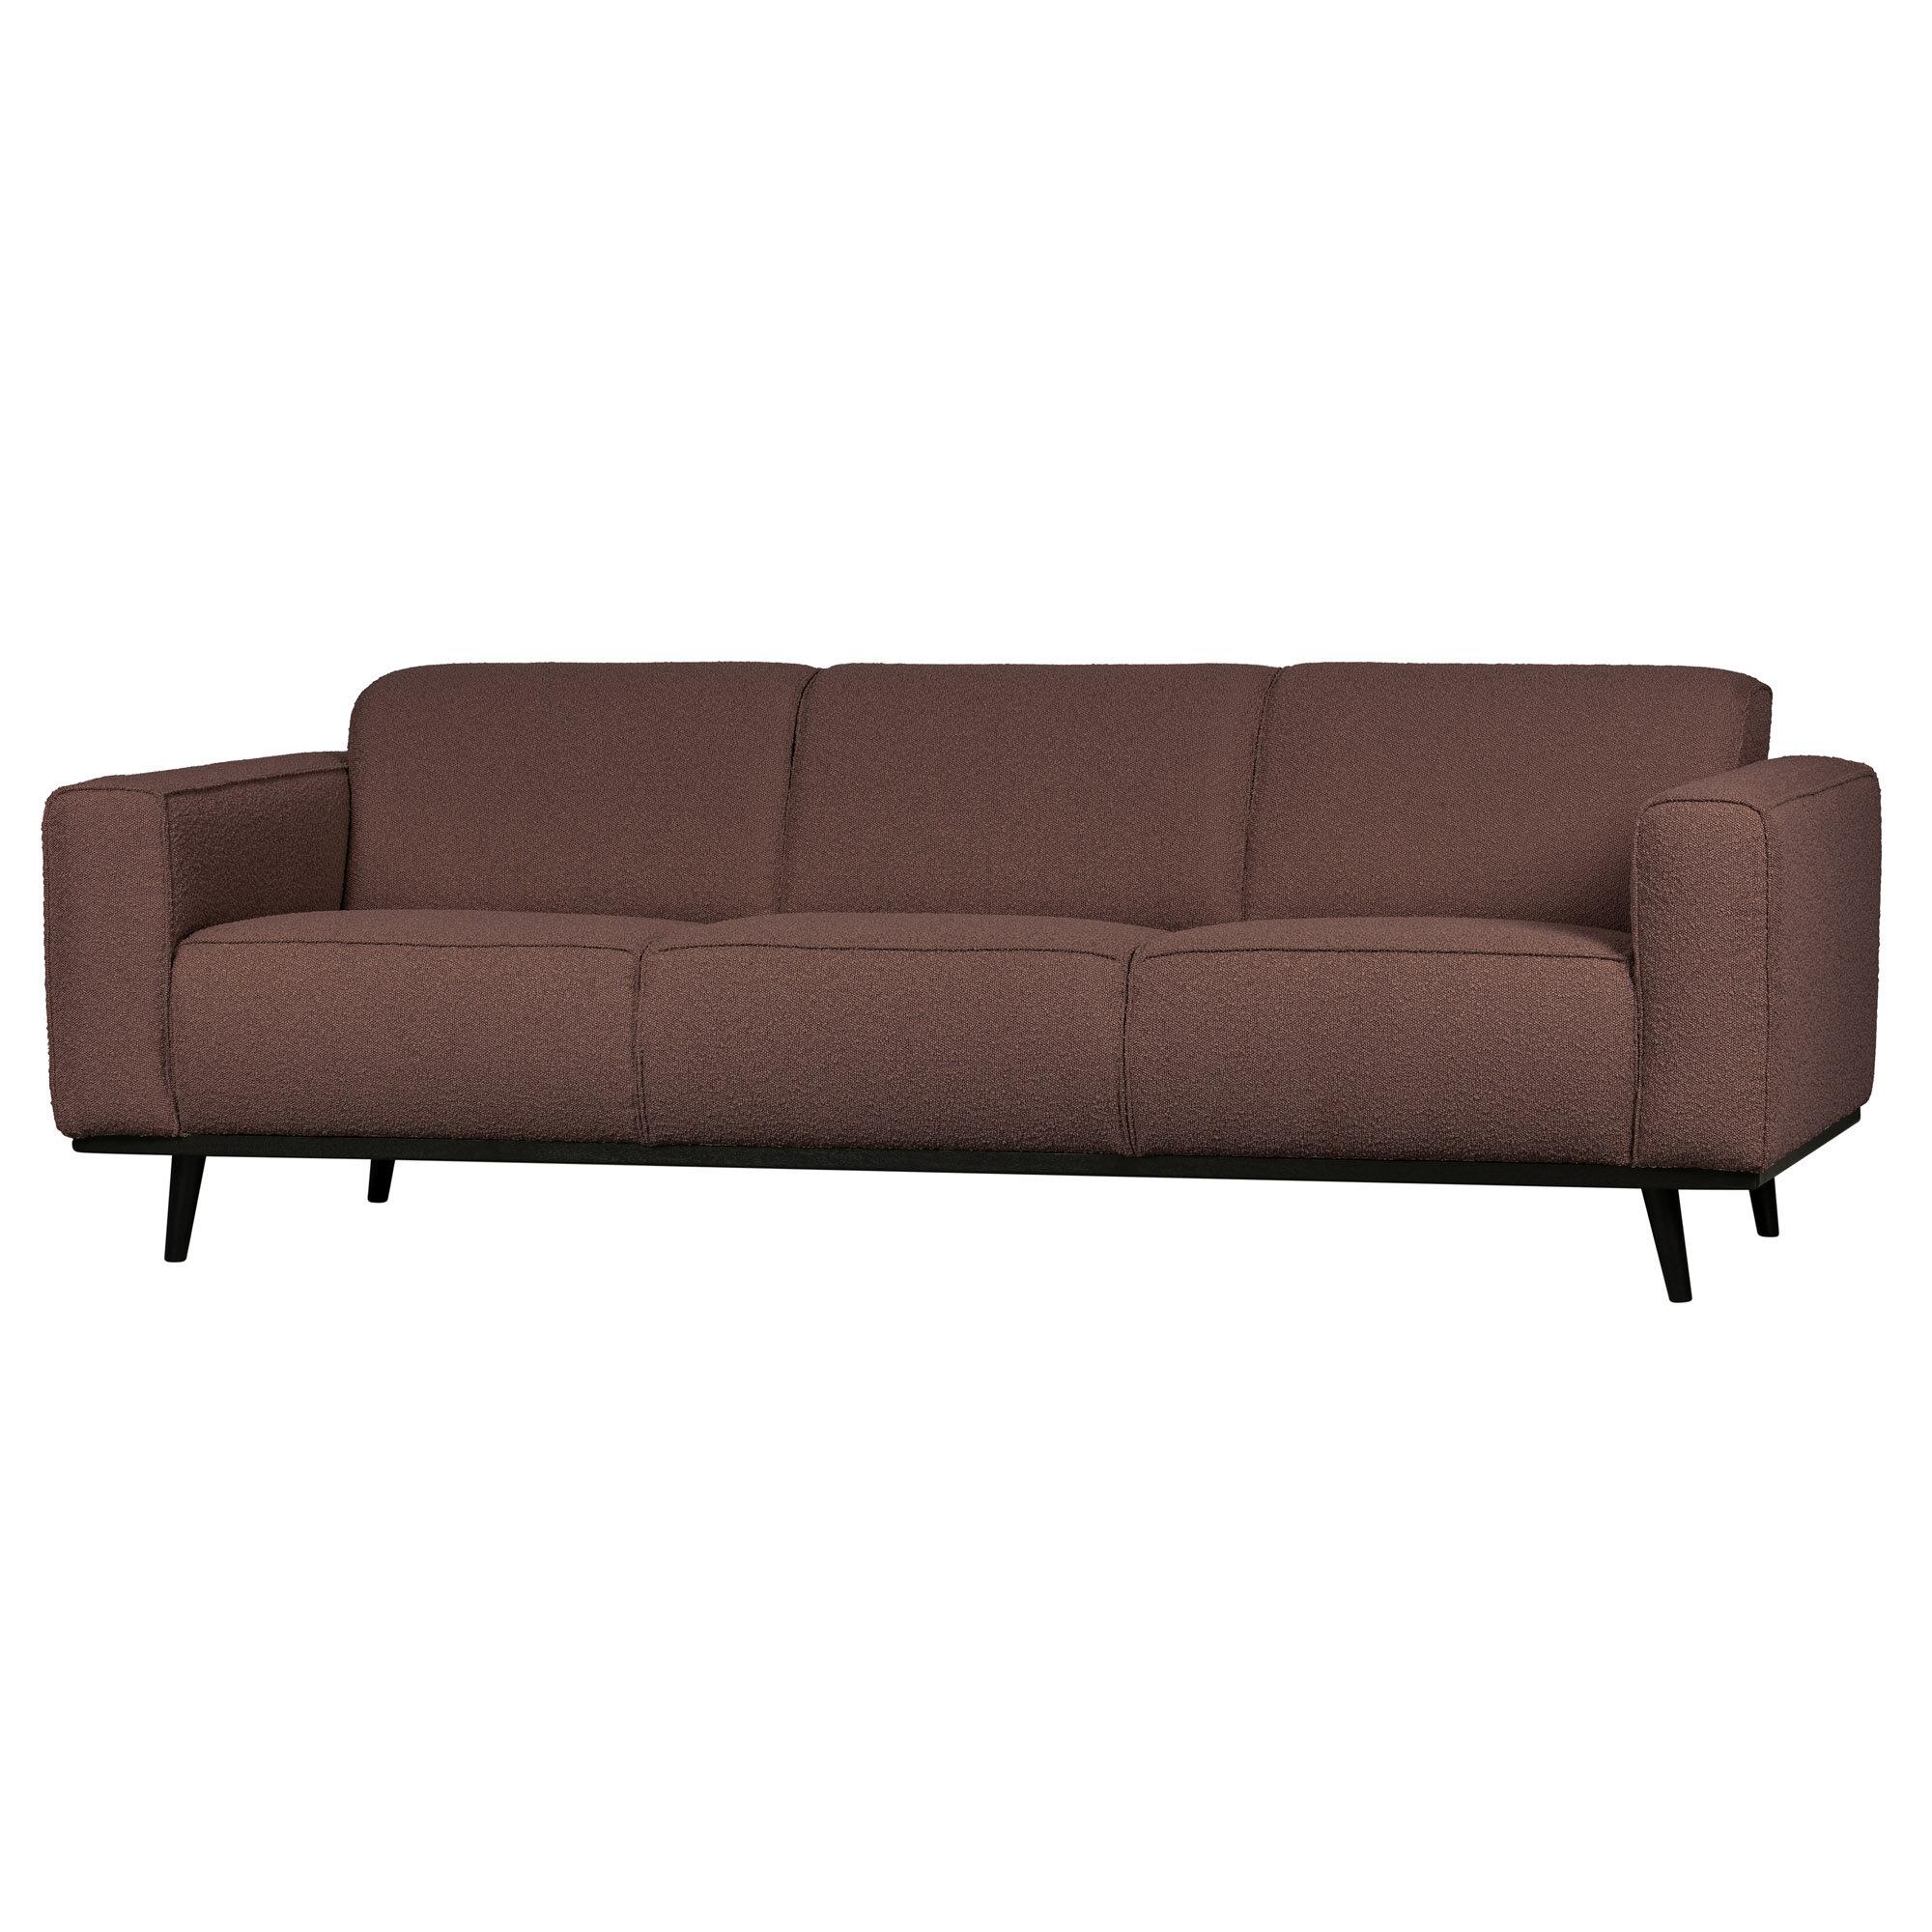  Statement 3-pers Sofa 230 cm Boucle - Coffee fra BePureHome i Boucle (Varenr: 377088-K)